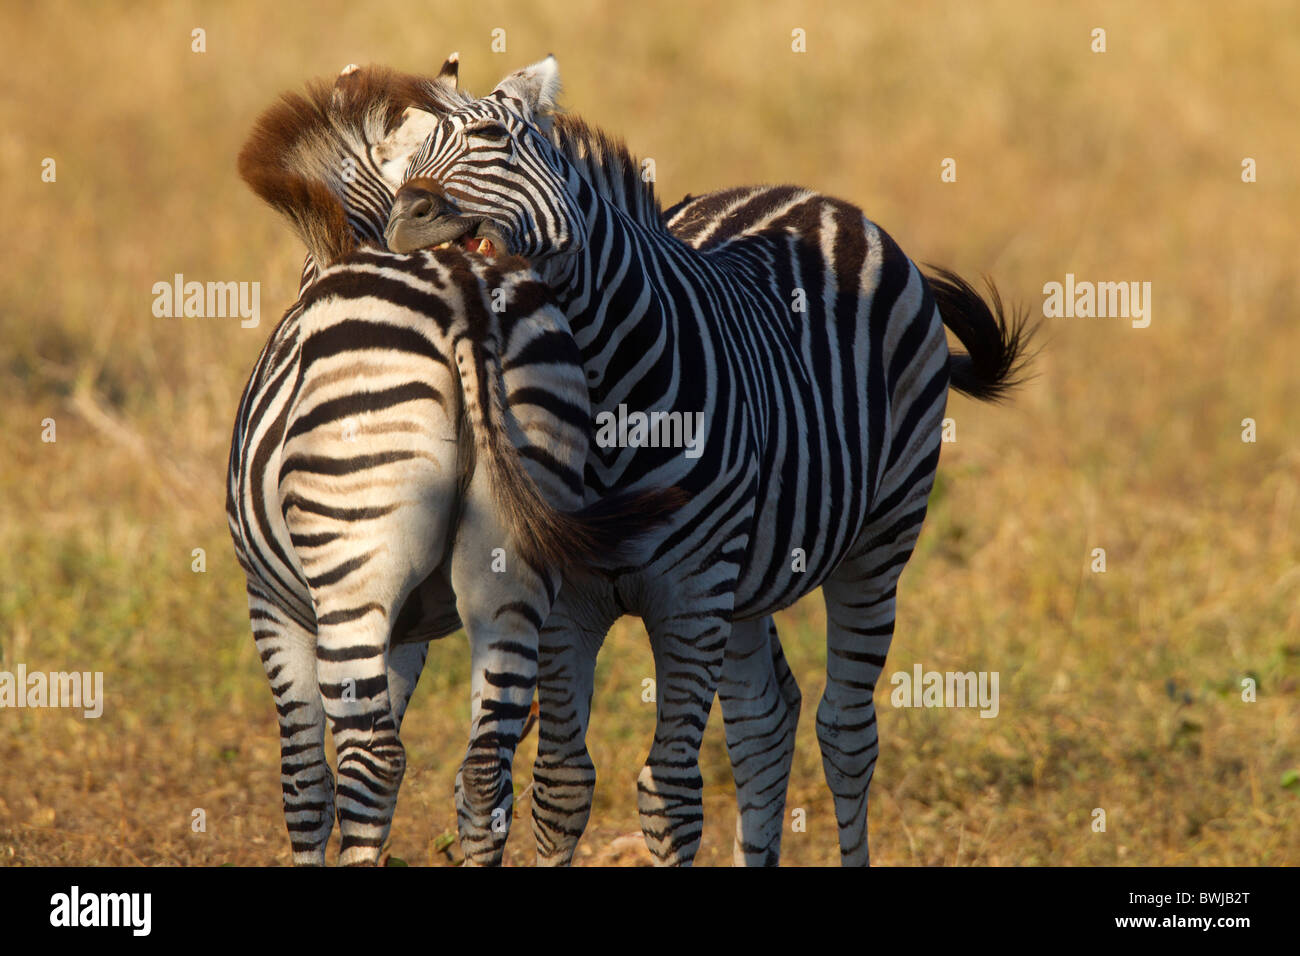 Burchell's Zebras Nuzzling Each Other, Kruger National Park, South Africa Stock Photo